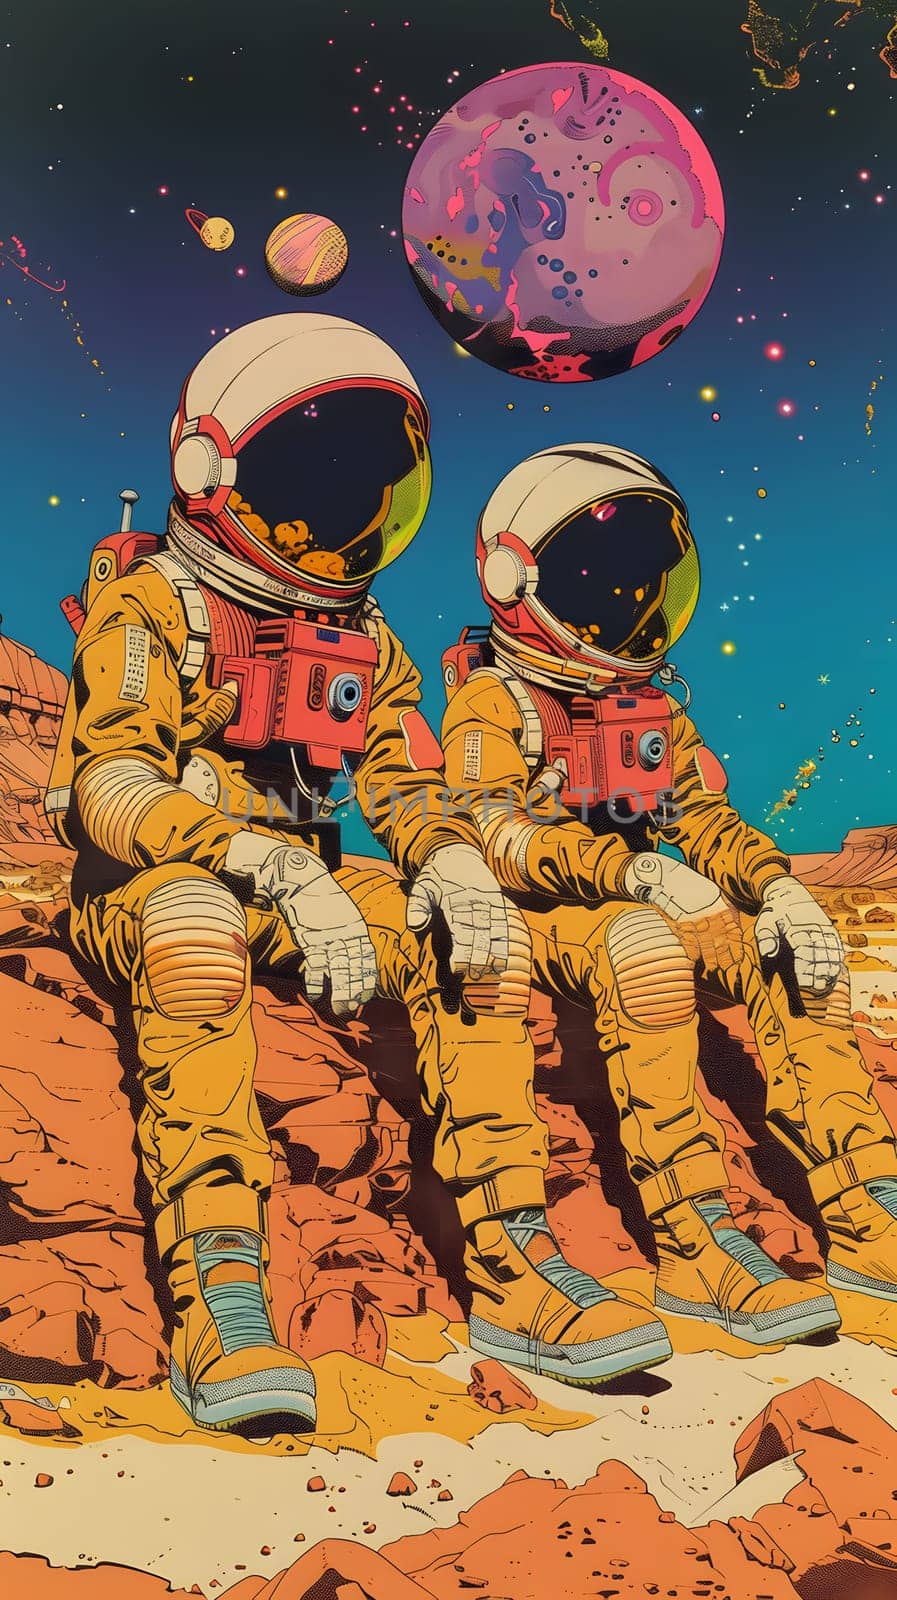 Astronauts enjoying a leisurely moment on a rock in a fictional painting by Nadtochiy